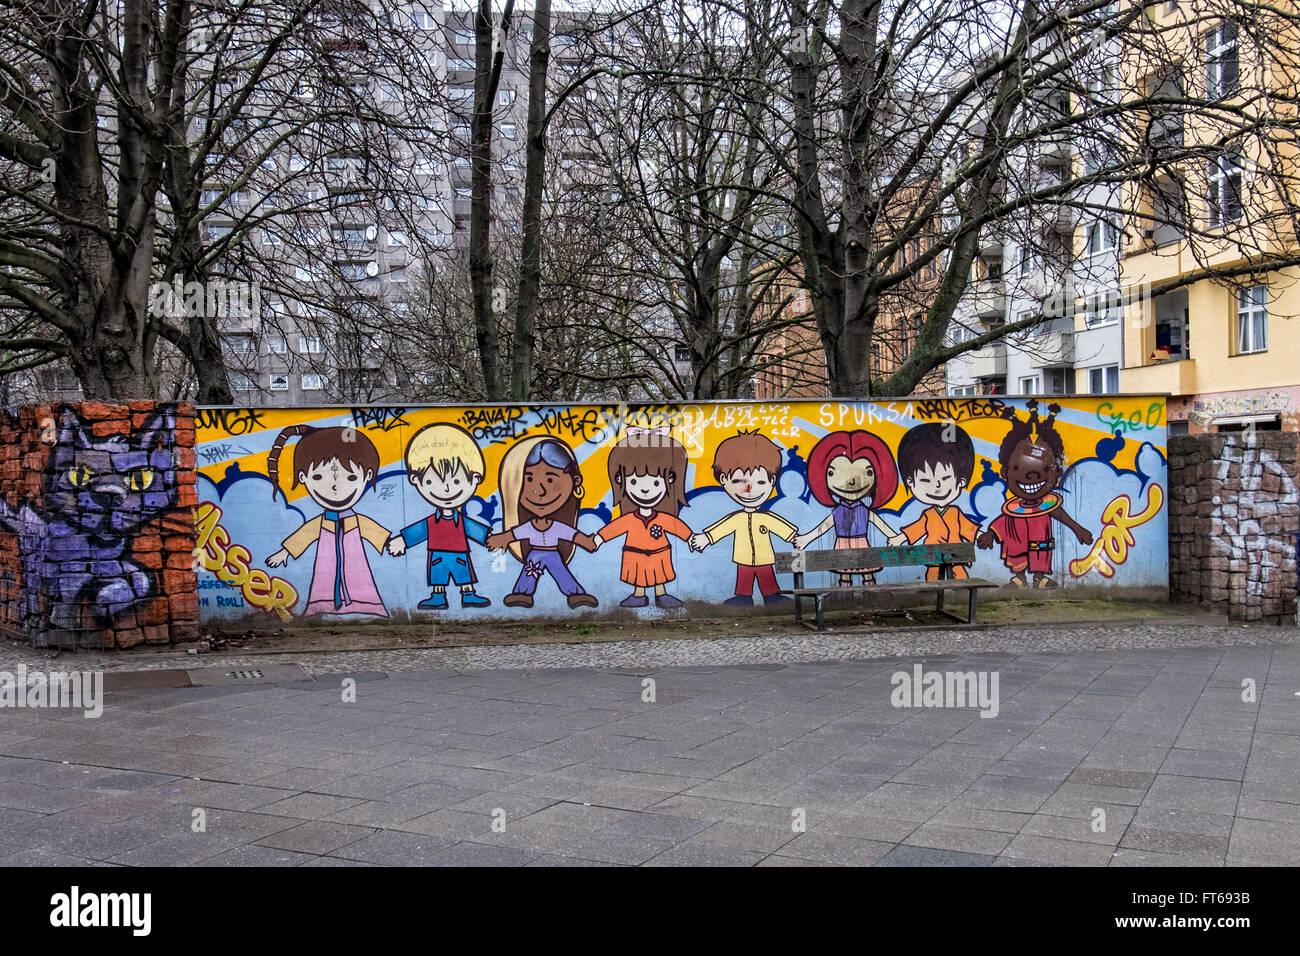 Children of different races holding hands in colourful street art work on park wall in near Kotbusser Tor, Berlin Stock Photo